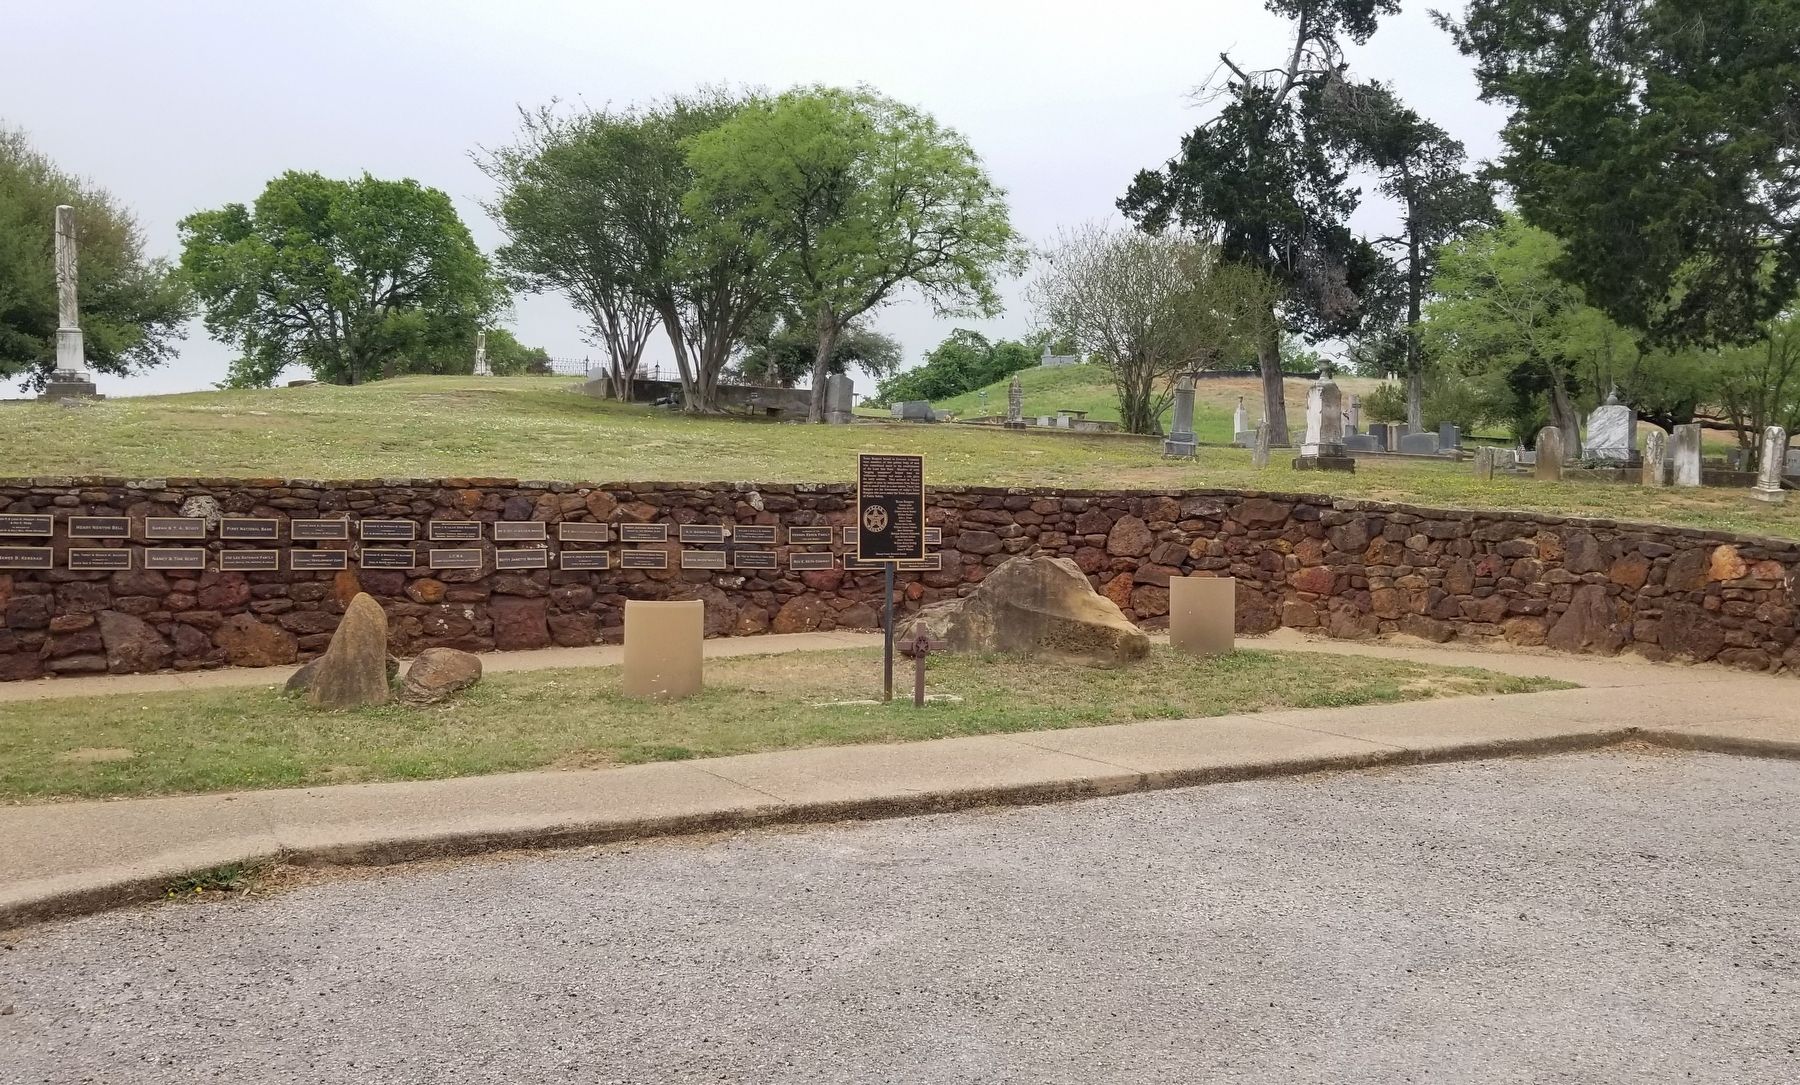 The view of the Texas Rangers Marker from the cemetery parking lot image. Click for full size.